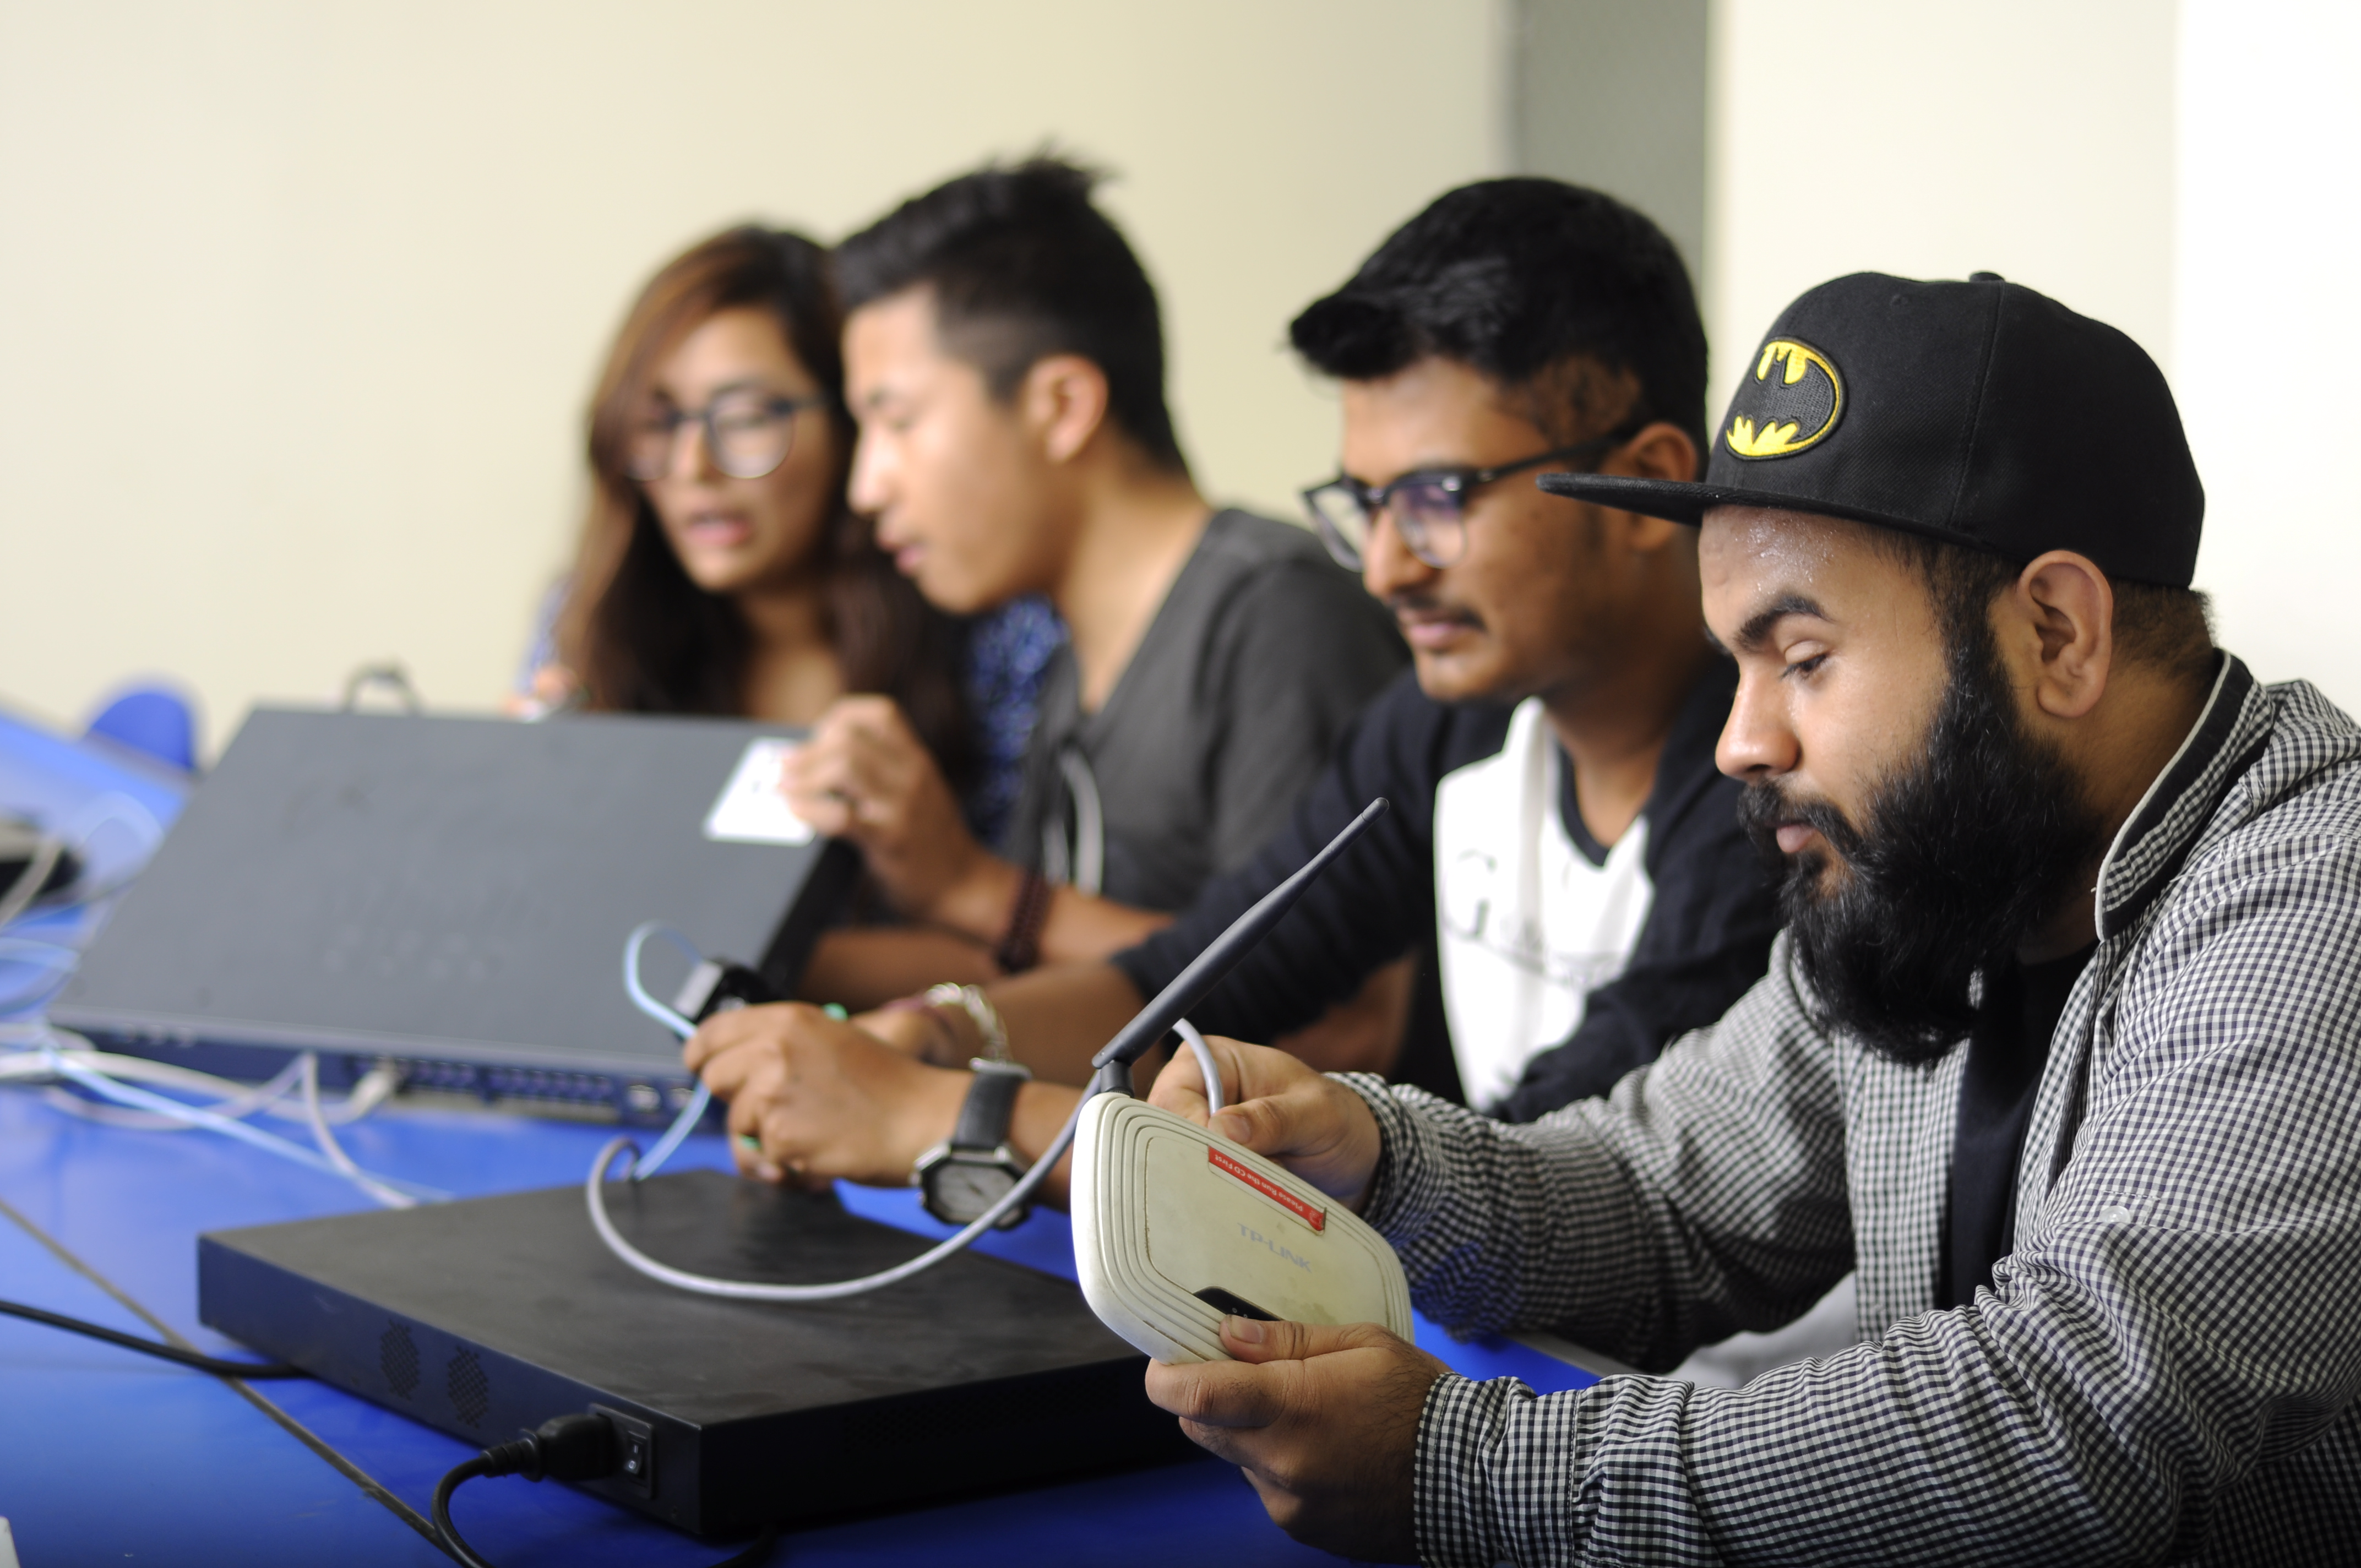 TBC & Cisco Combine the Power of the Internet and Education at New Cisco Academy